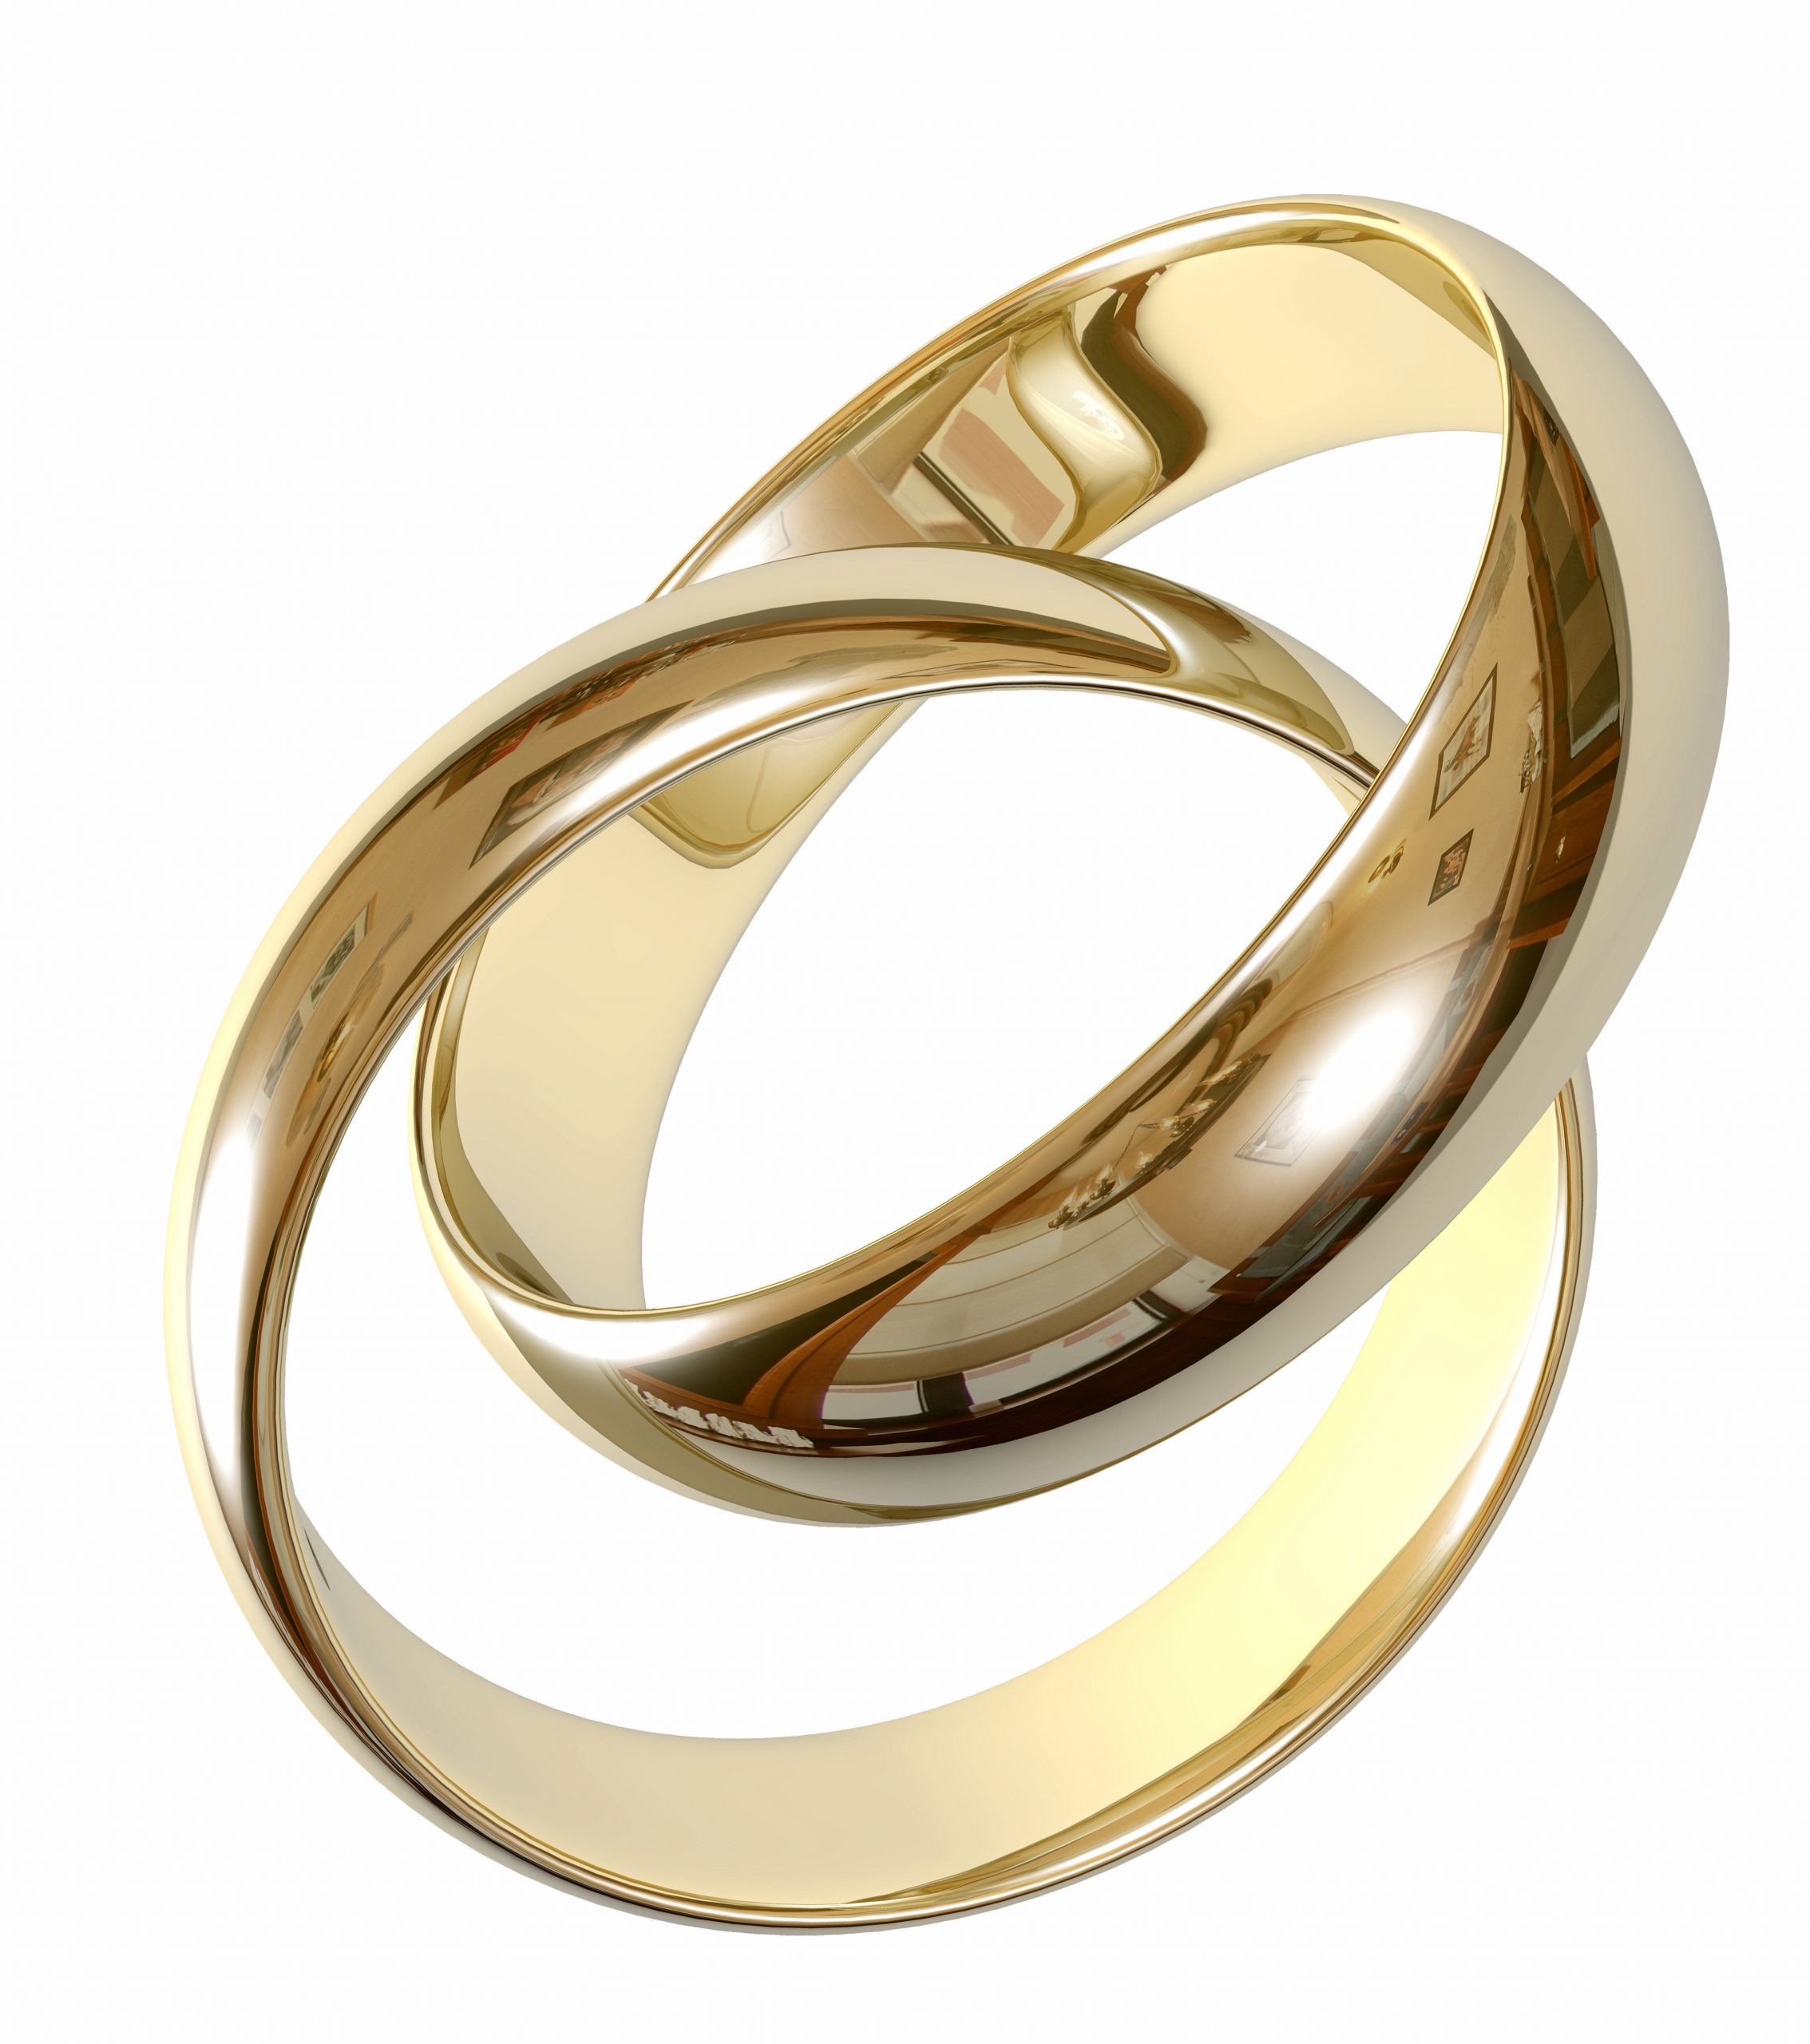 Free Wedding Rings
 Wedding ring hd wallpapers images photos and pics free